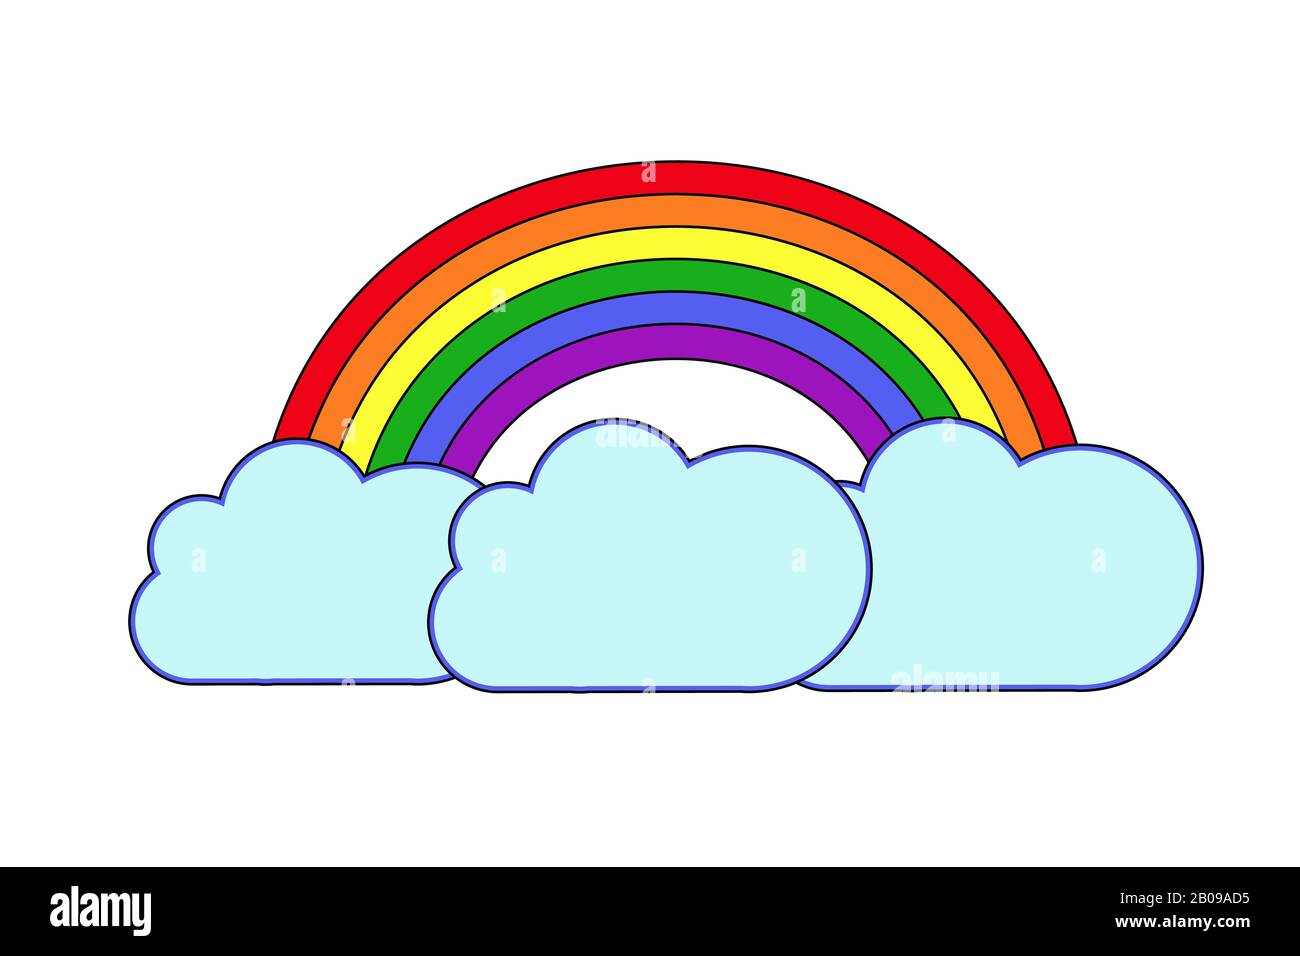 Colored rainbow and clouds on white background vector illustration Stock Vector